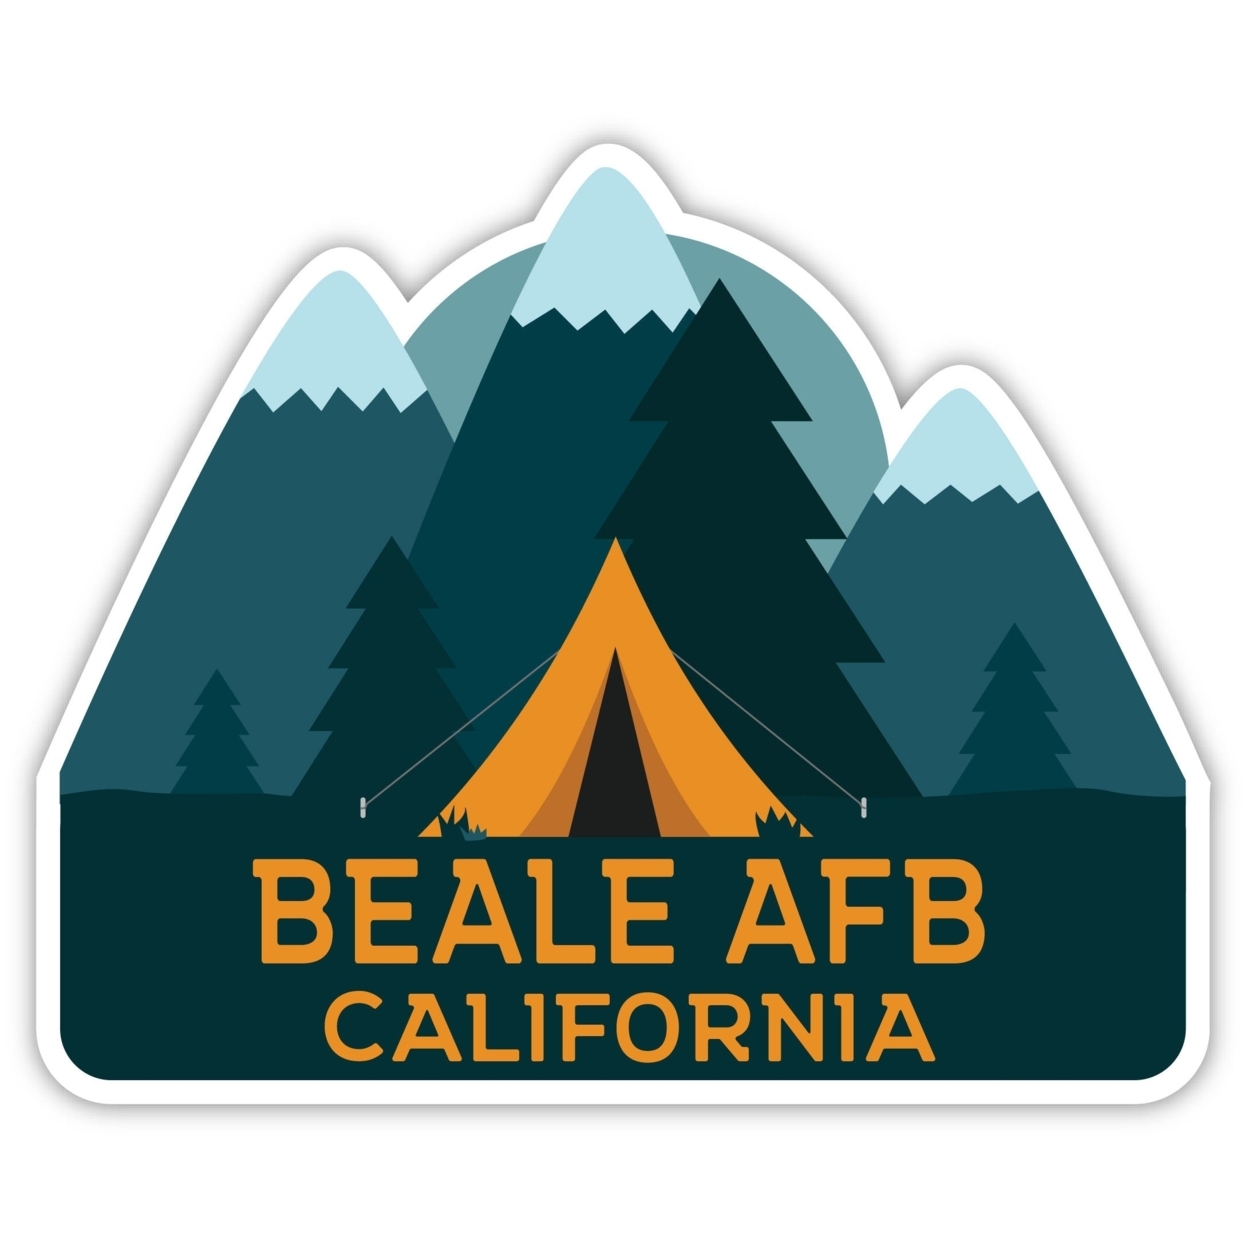 Beale AFB California Souvenir Decorative Stickers (Choose Theme And Size) - 4-Pack, 4-Inch, Tent